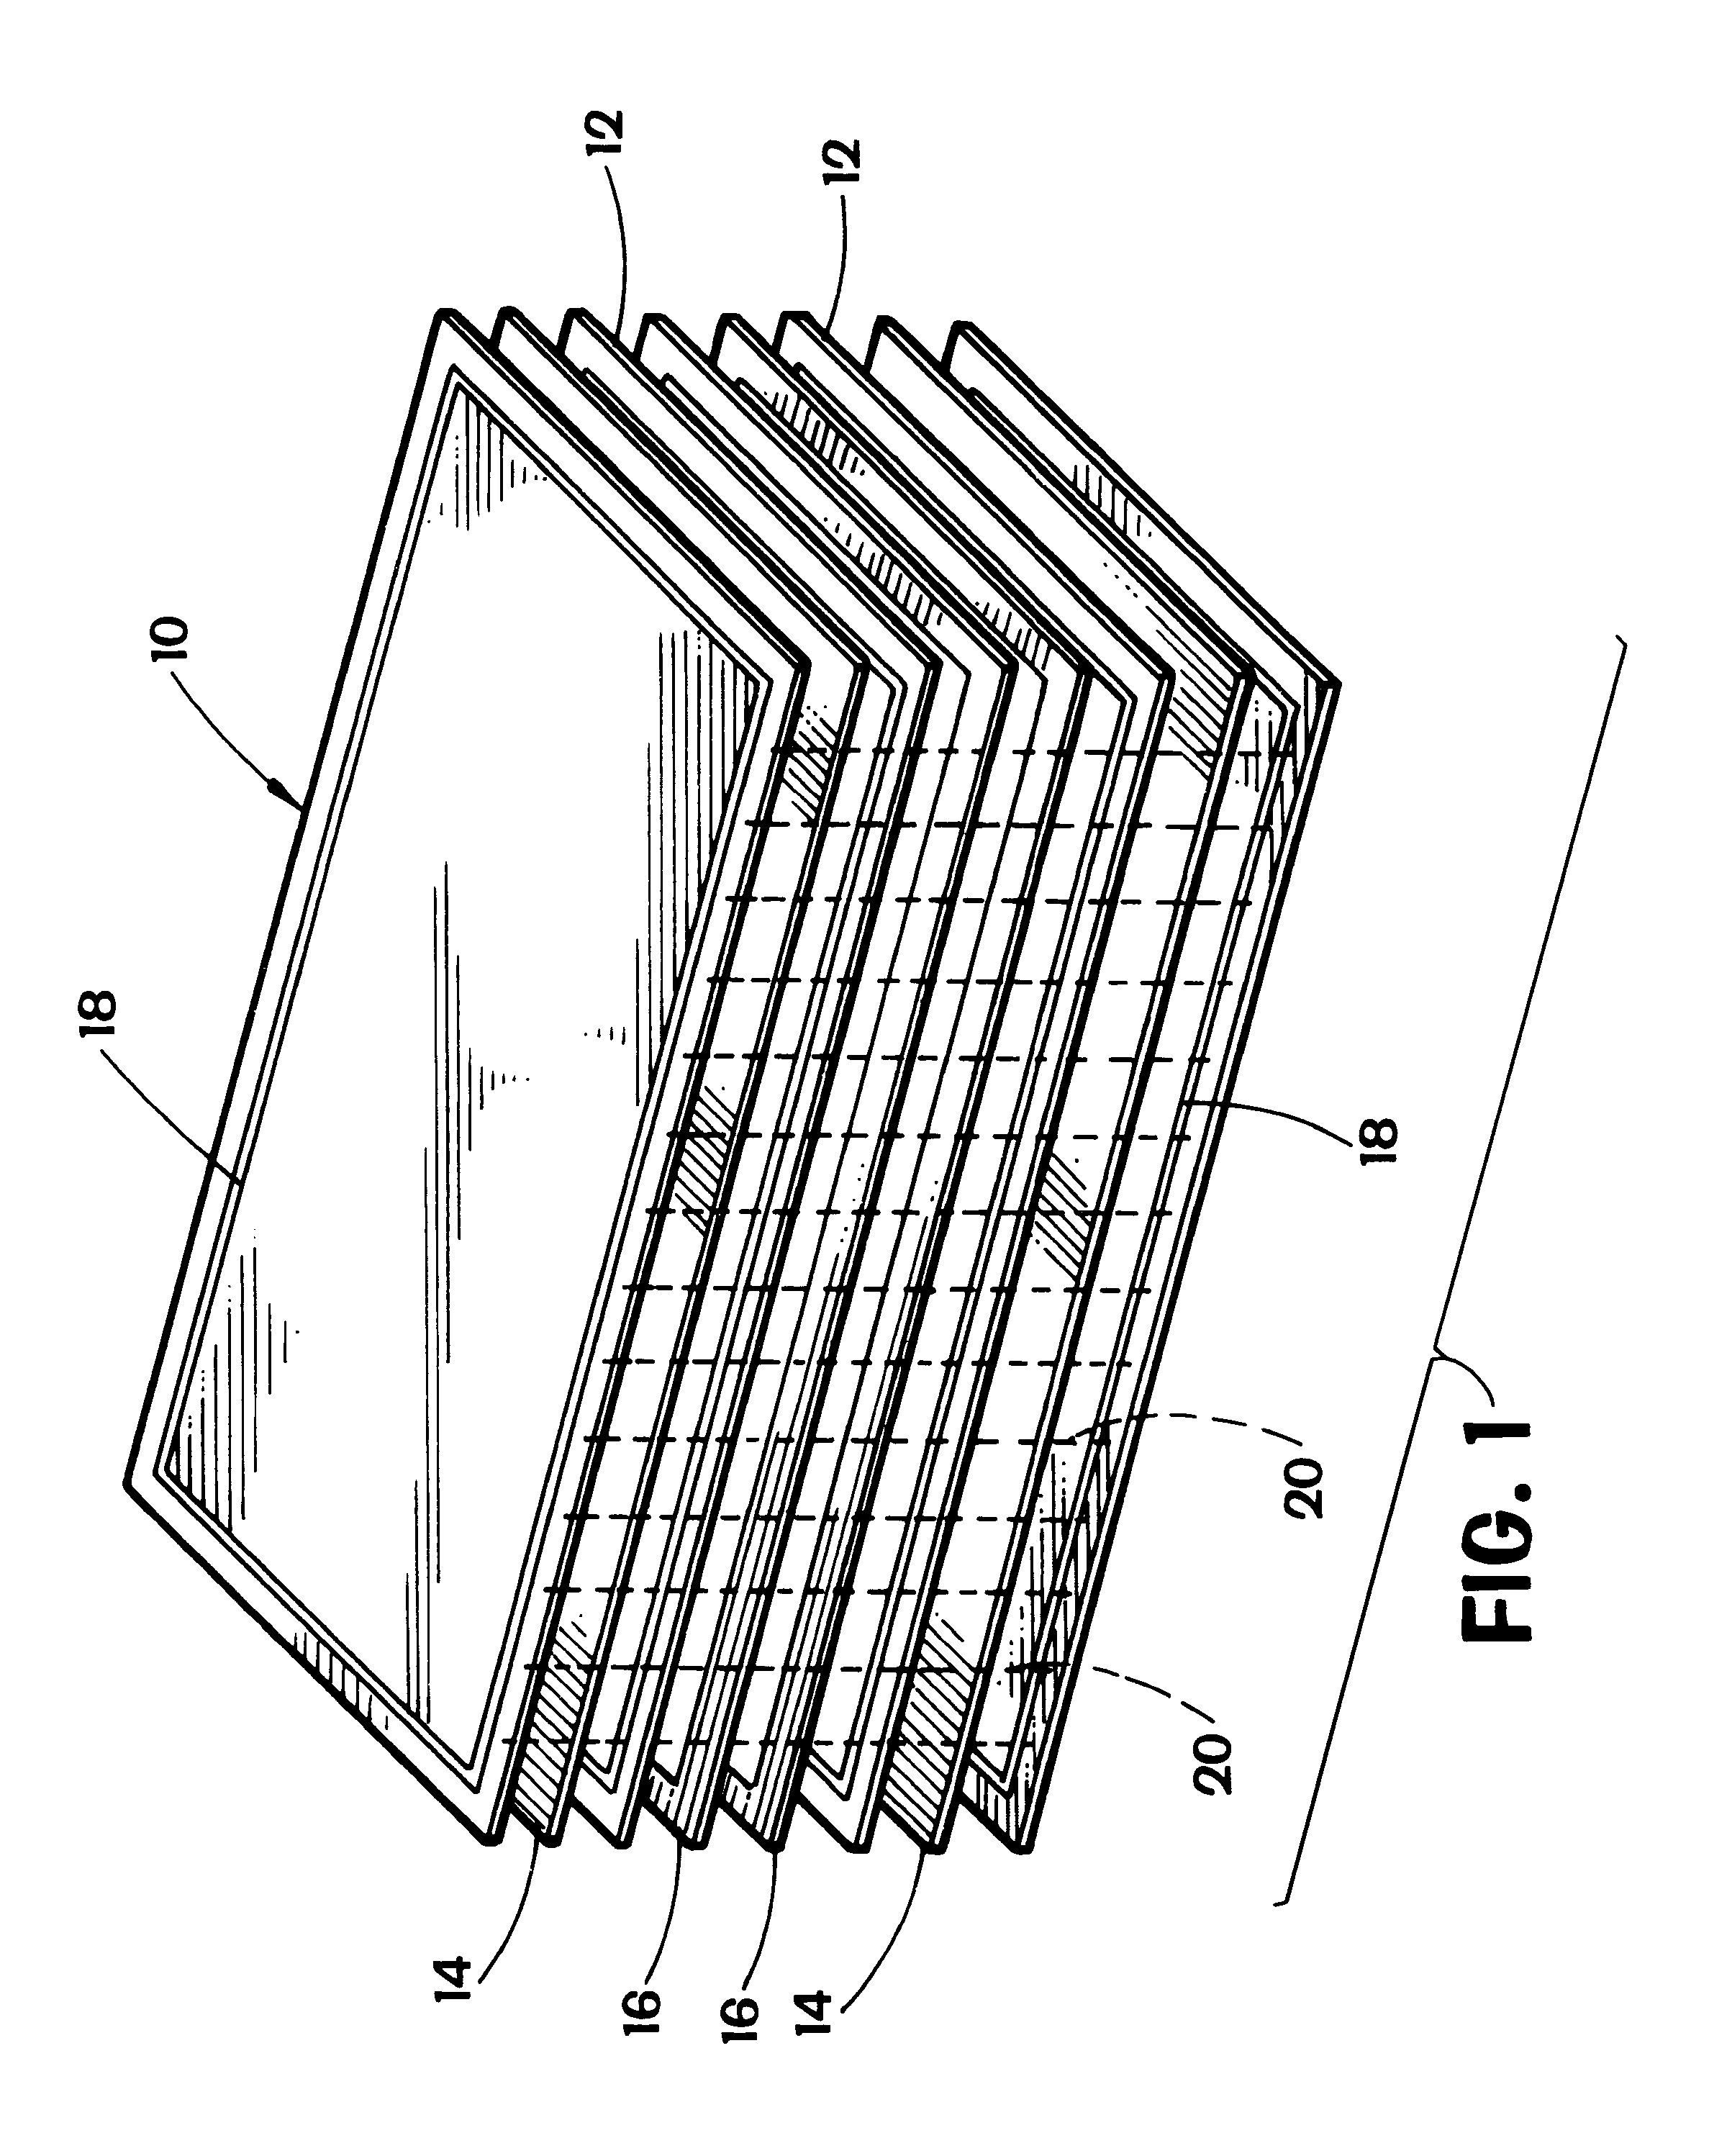 Substrate for reducing electromagnetic interference and enclosure